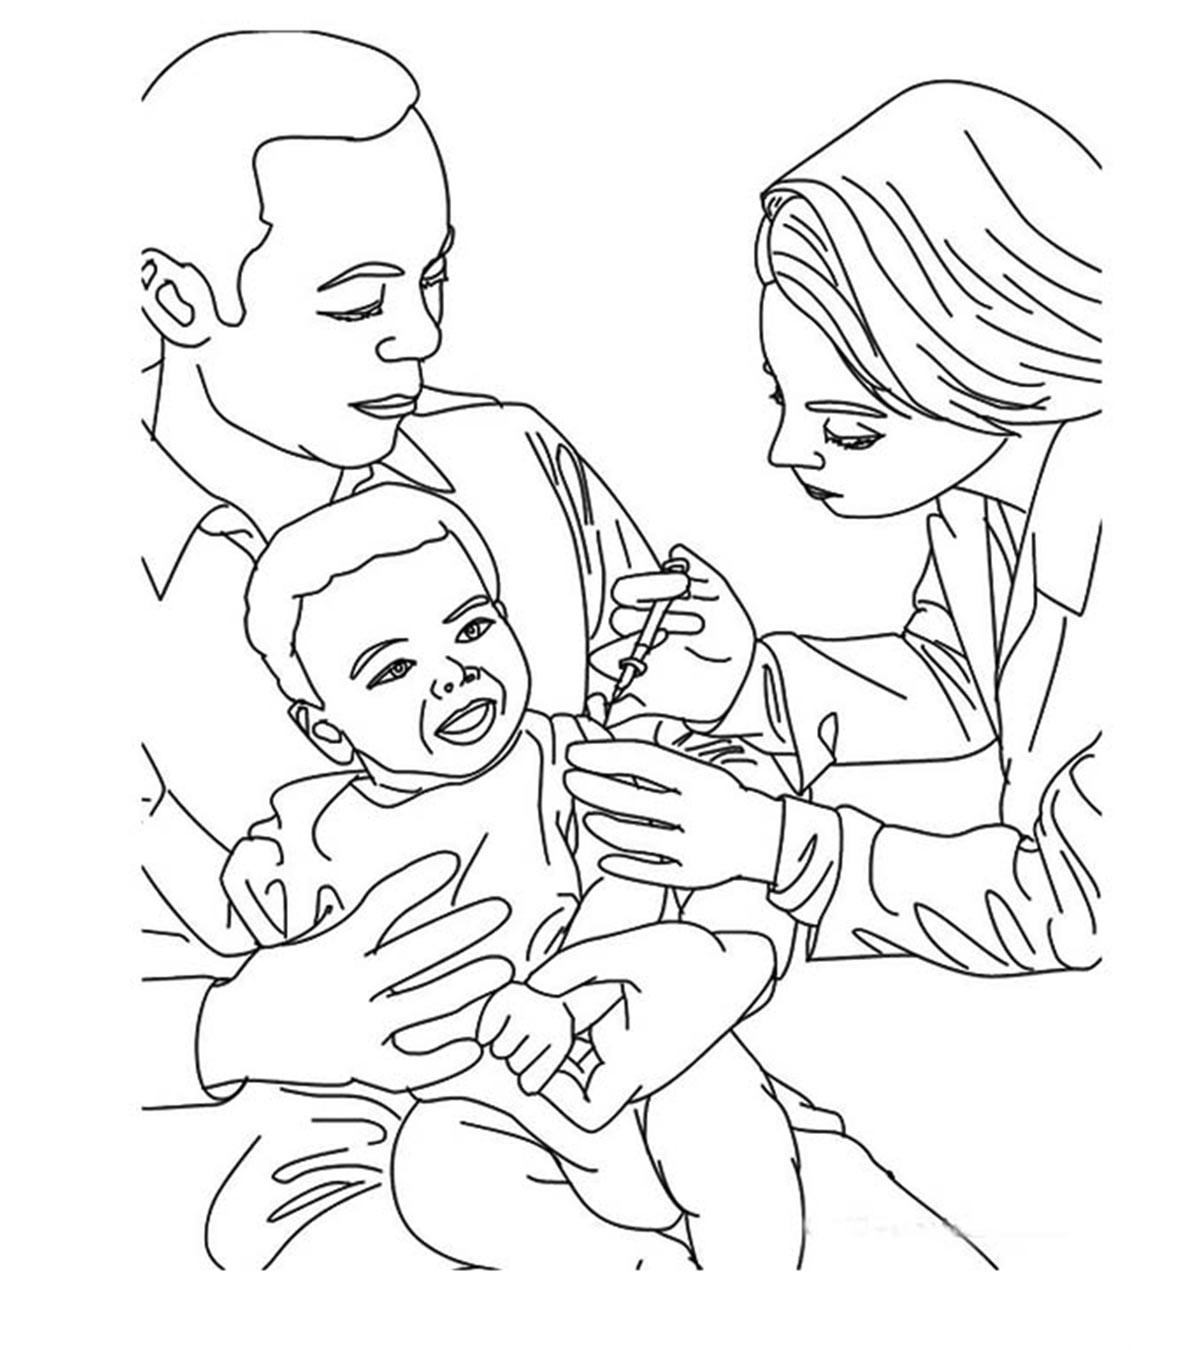 Community Helpers and People Coloring Pages - MomJunction